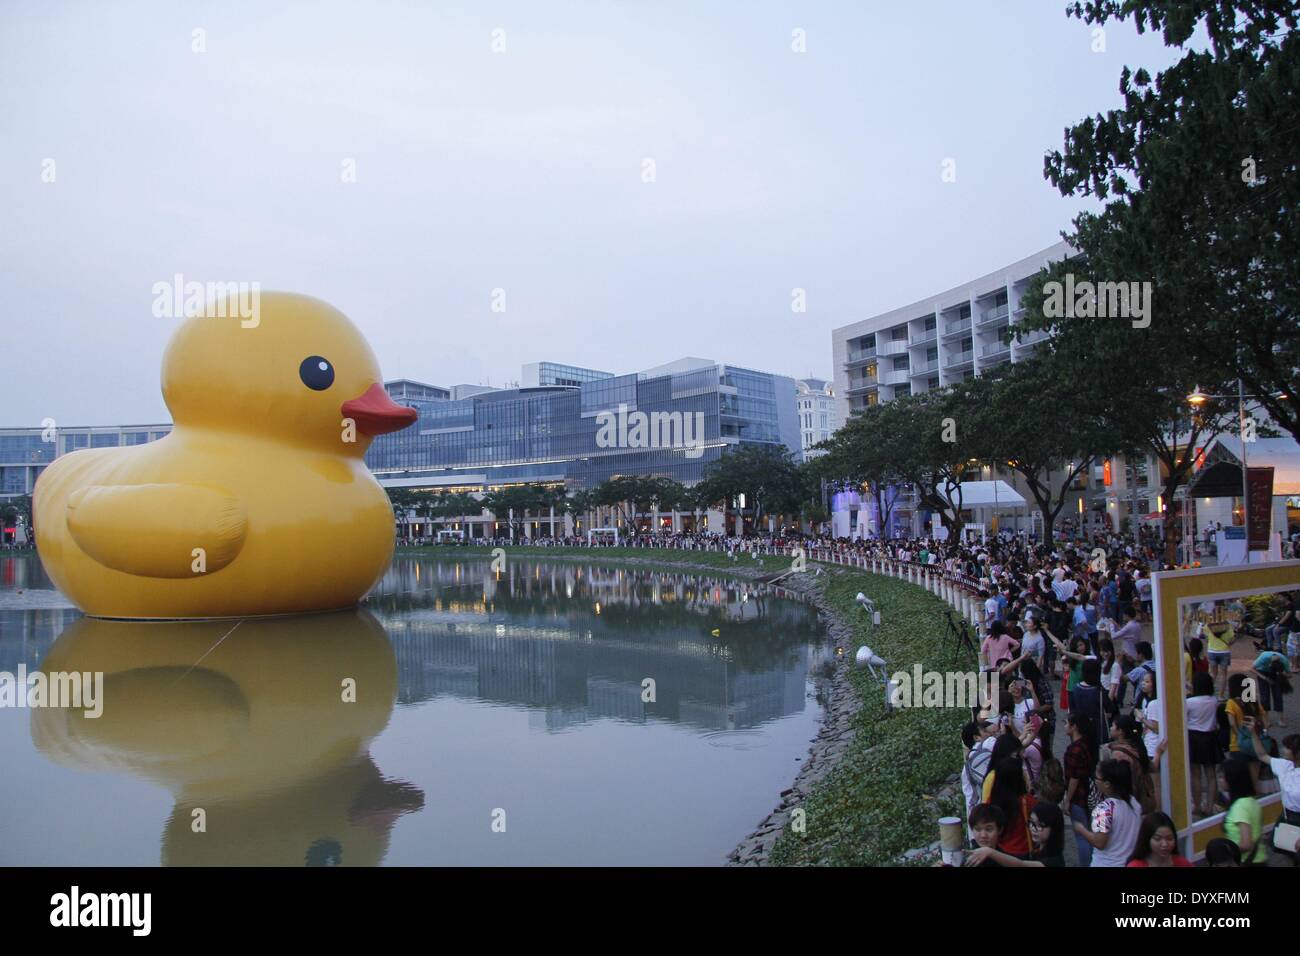 (140427) -- HO CHI MINH CITY, April 27 (Xinhua) -- People watch the giant rubber duck in the Phu My Hung residential area in Ho Chi Minh (HCM) City, Vietnam, April 26, 2014. A 18-meter-tall rubber duck, which has captivated people across the world, will be displayed at the Crescent Lake in the Phu My Hung residential area of HCM city from April 27 to May 31, local media reported Saturday. Designed by Dutch artist Florentijn Hofman, the rubber duck started a tour named 'Spreading Joys around the World' in 2007. HCM City will be the 16th venue where it is displayed. (Xinhua/Tao Jun) (dzl) Stock Photo